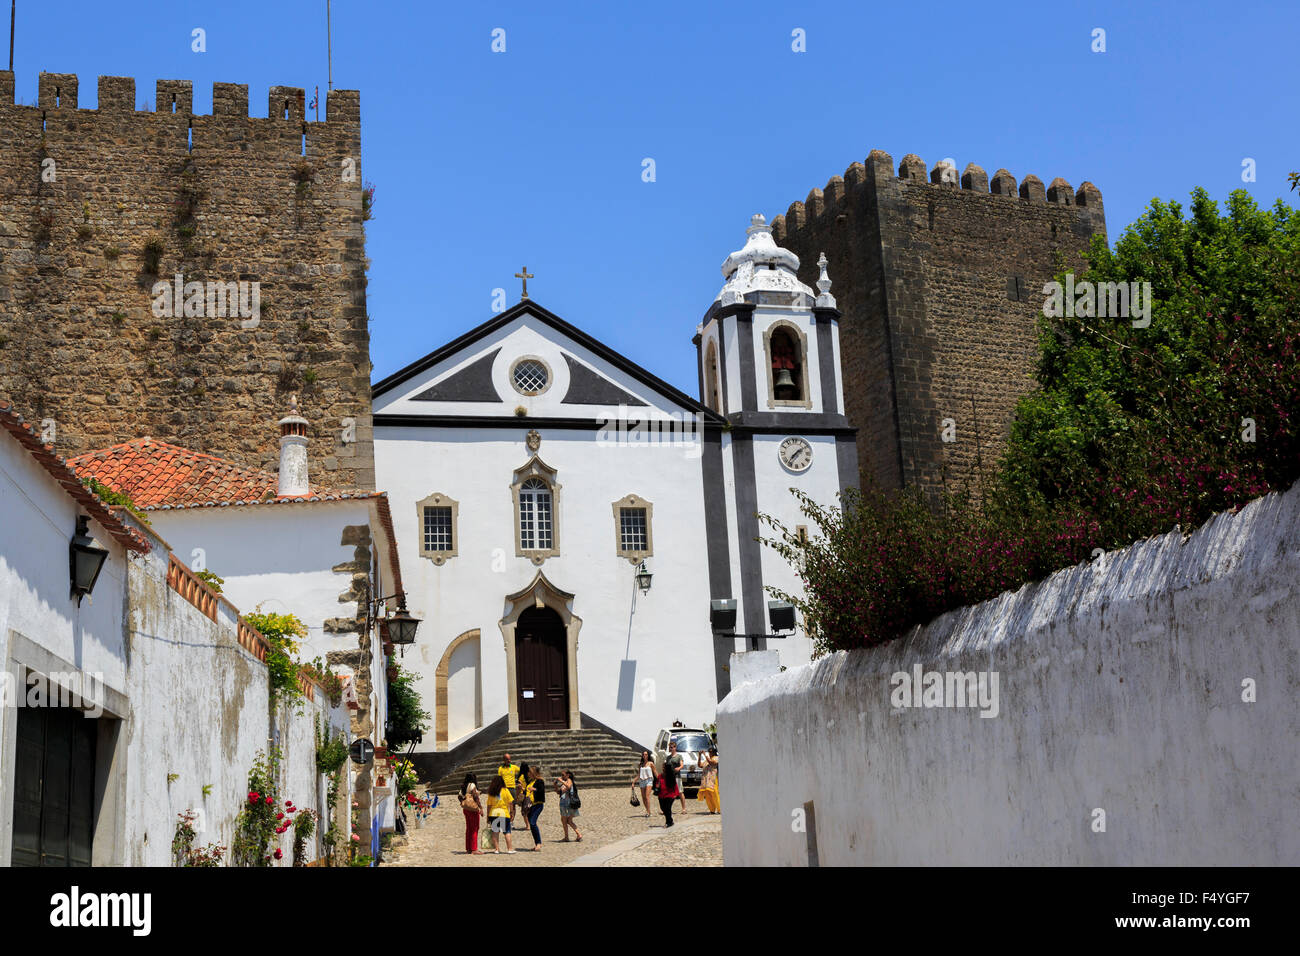 Tourist standing in front of the Igreja de Santiago (Church of Santiago) which is framed on either side by the old walls in Obidos, Portugal Stock Photo